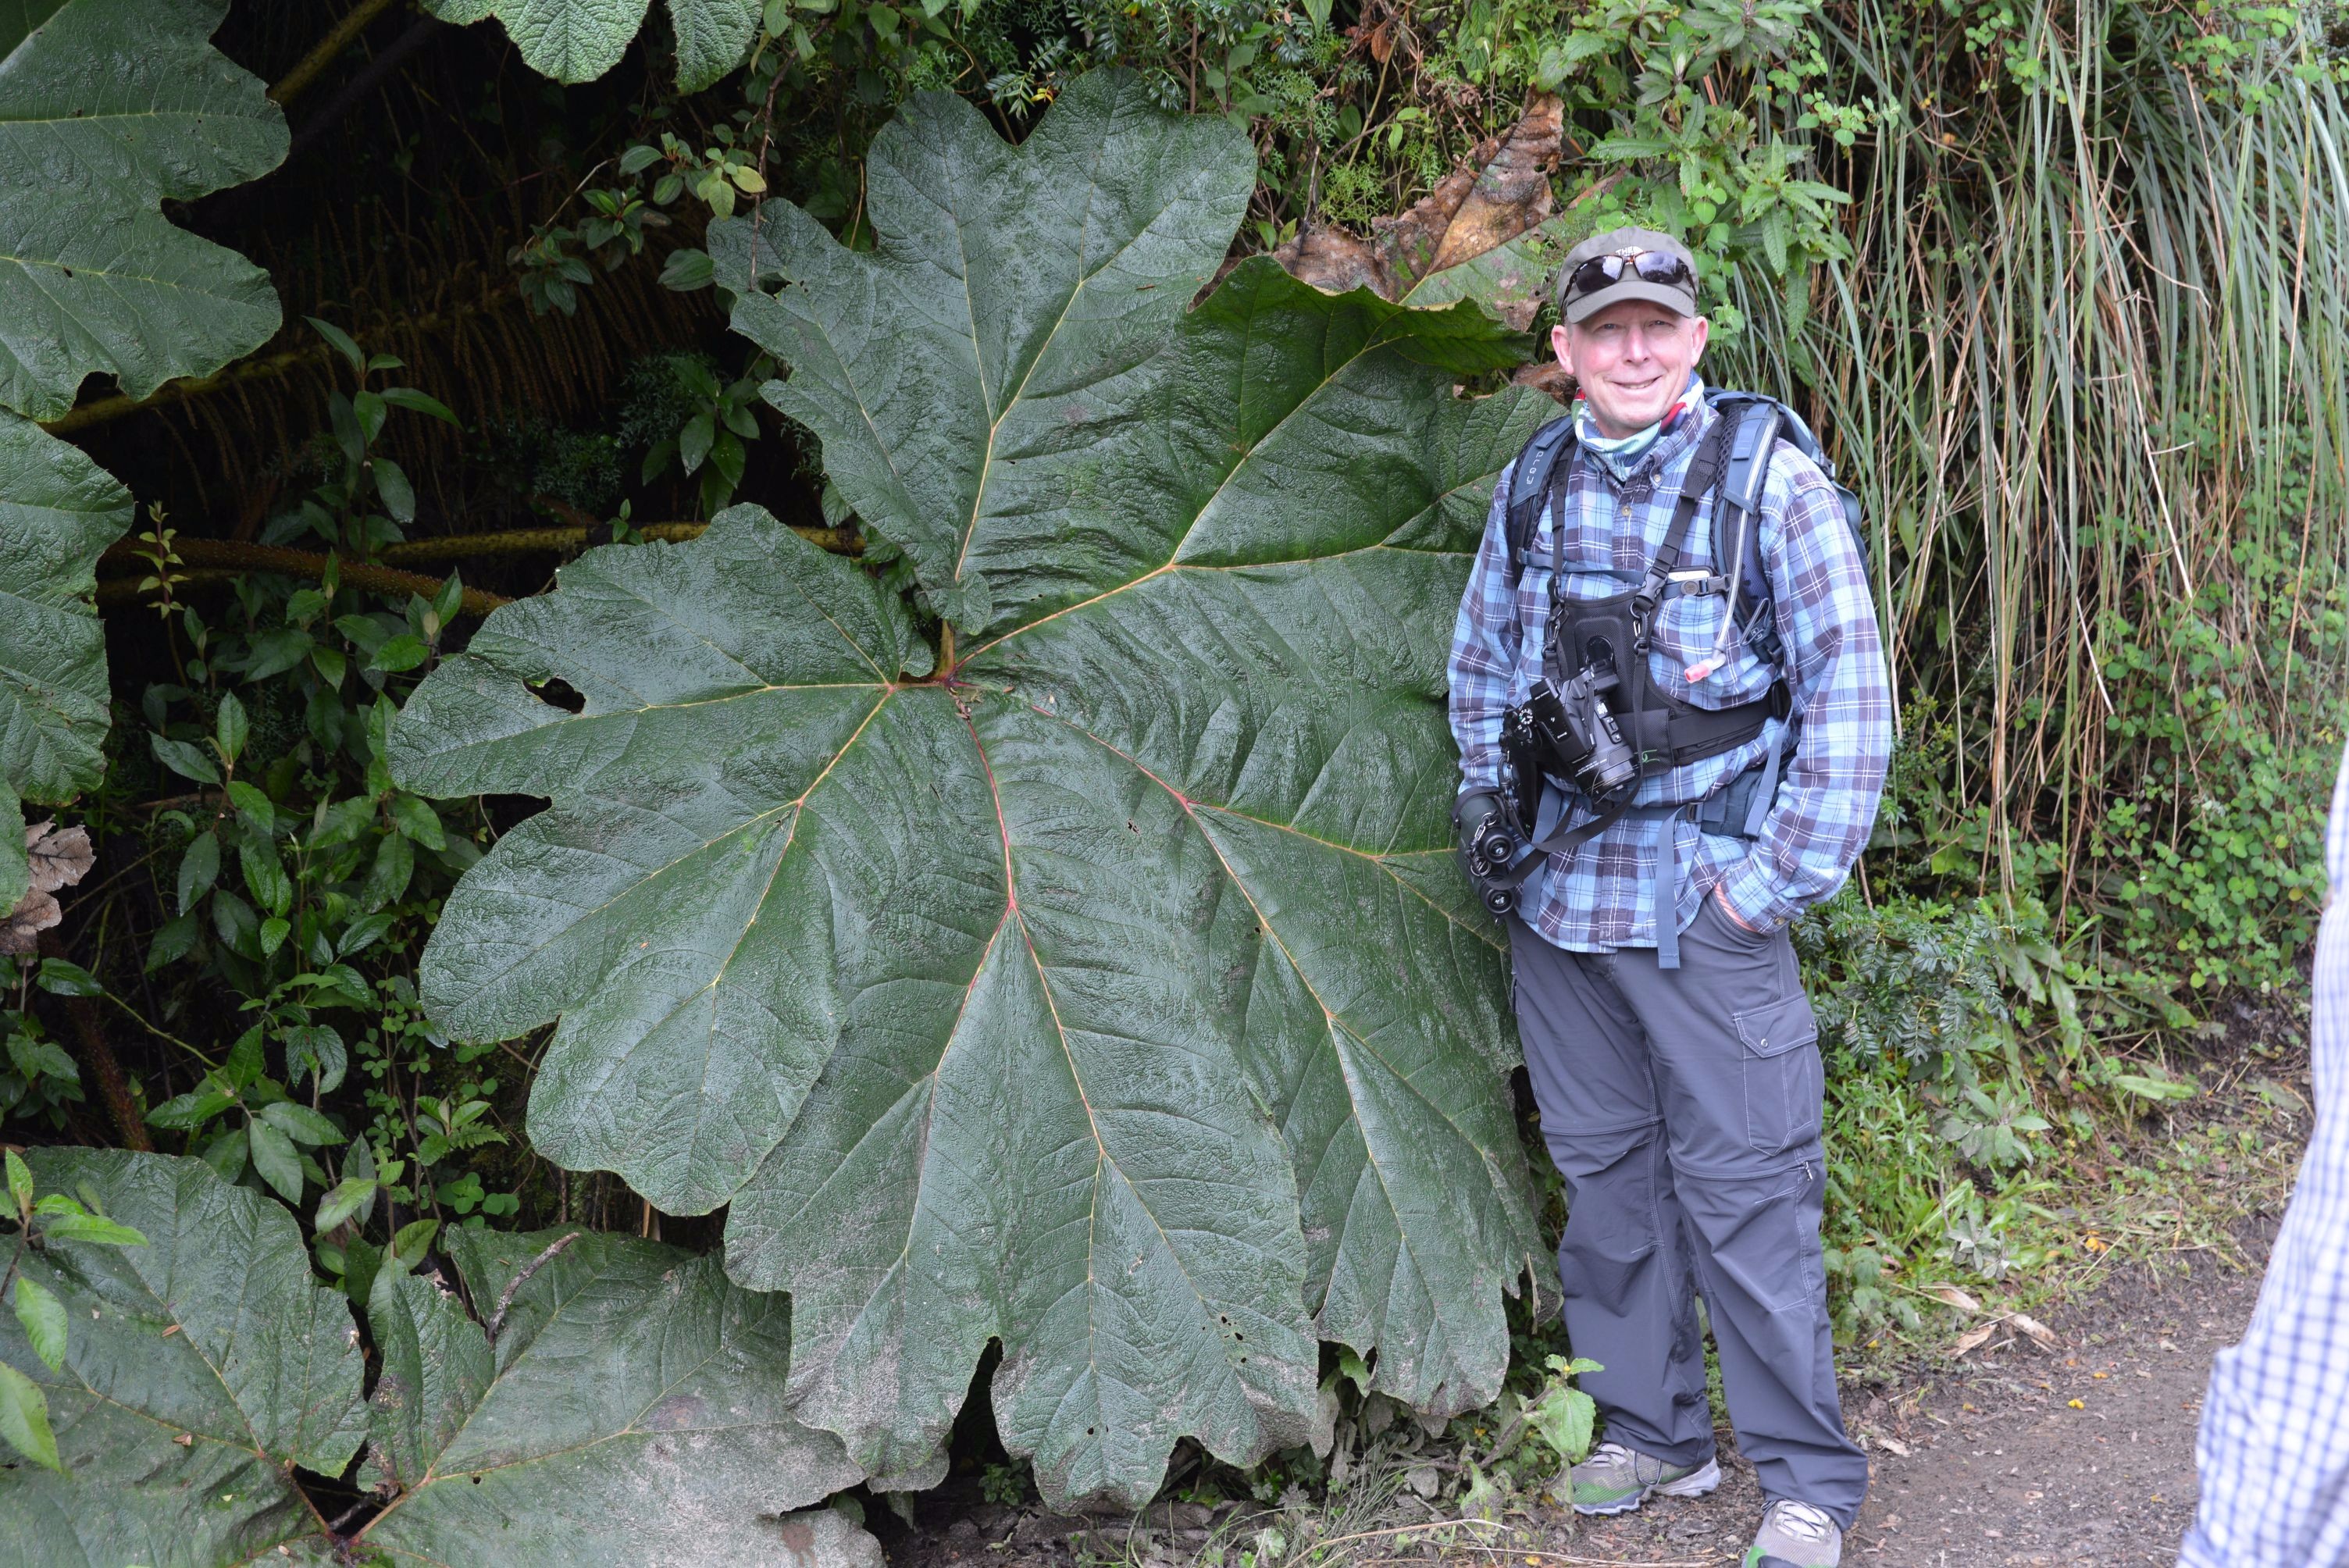 That leaf could be used as an umbrella. Mark at the Yanacocha Nature Reserve.